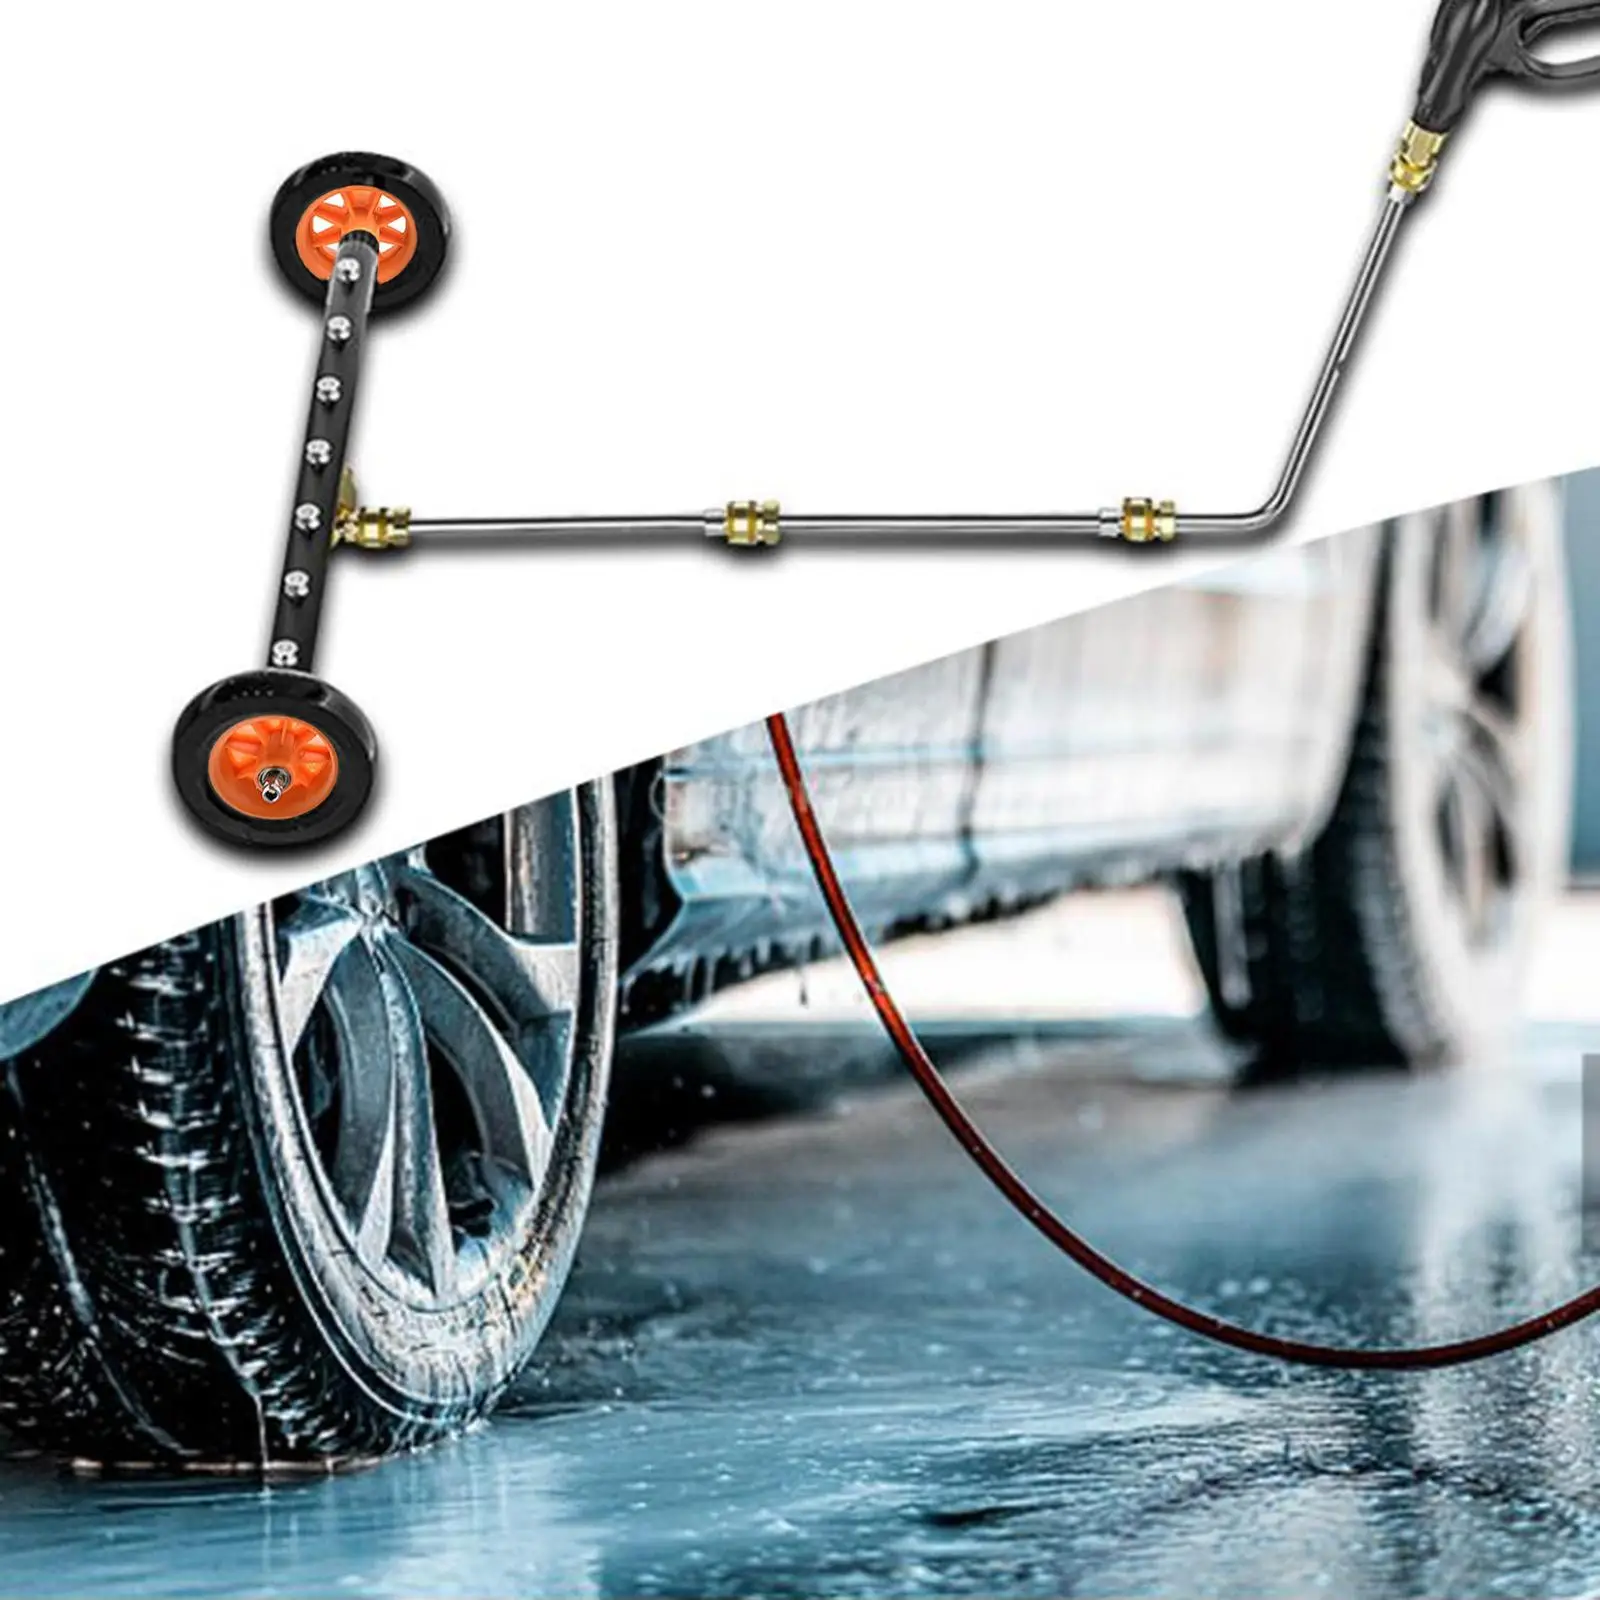 Undercarriage Water Broom Dual Function 16 inch Undercarriage Washer Pressure Washer under Car Cleaner for RV SUV Vehicles Truck